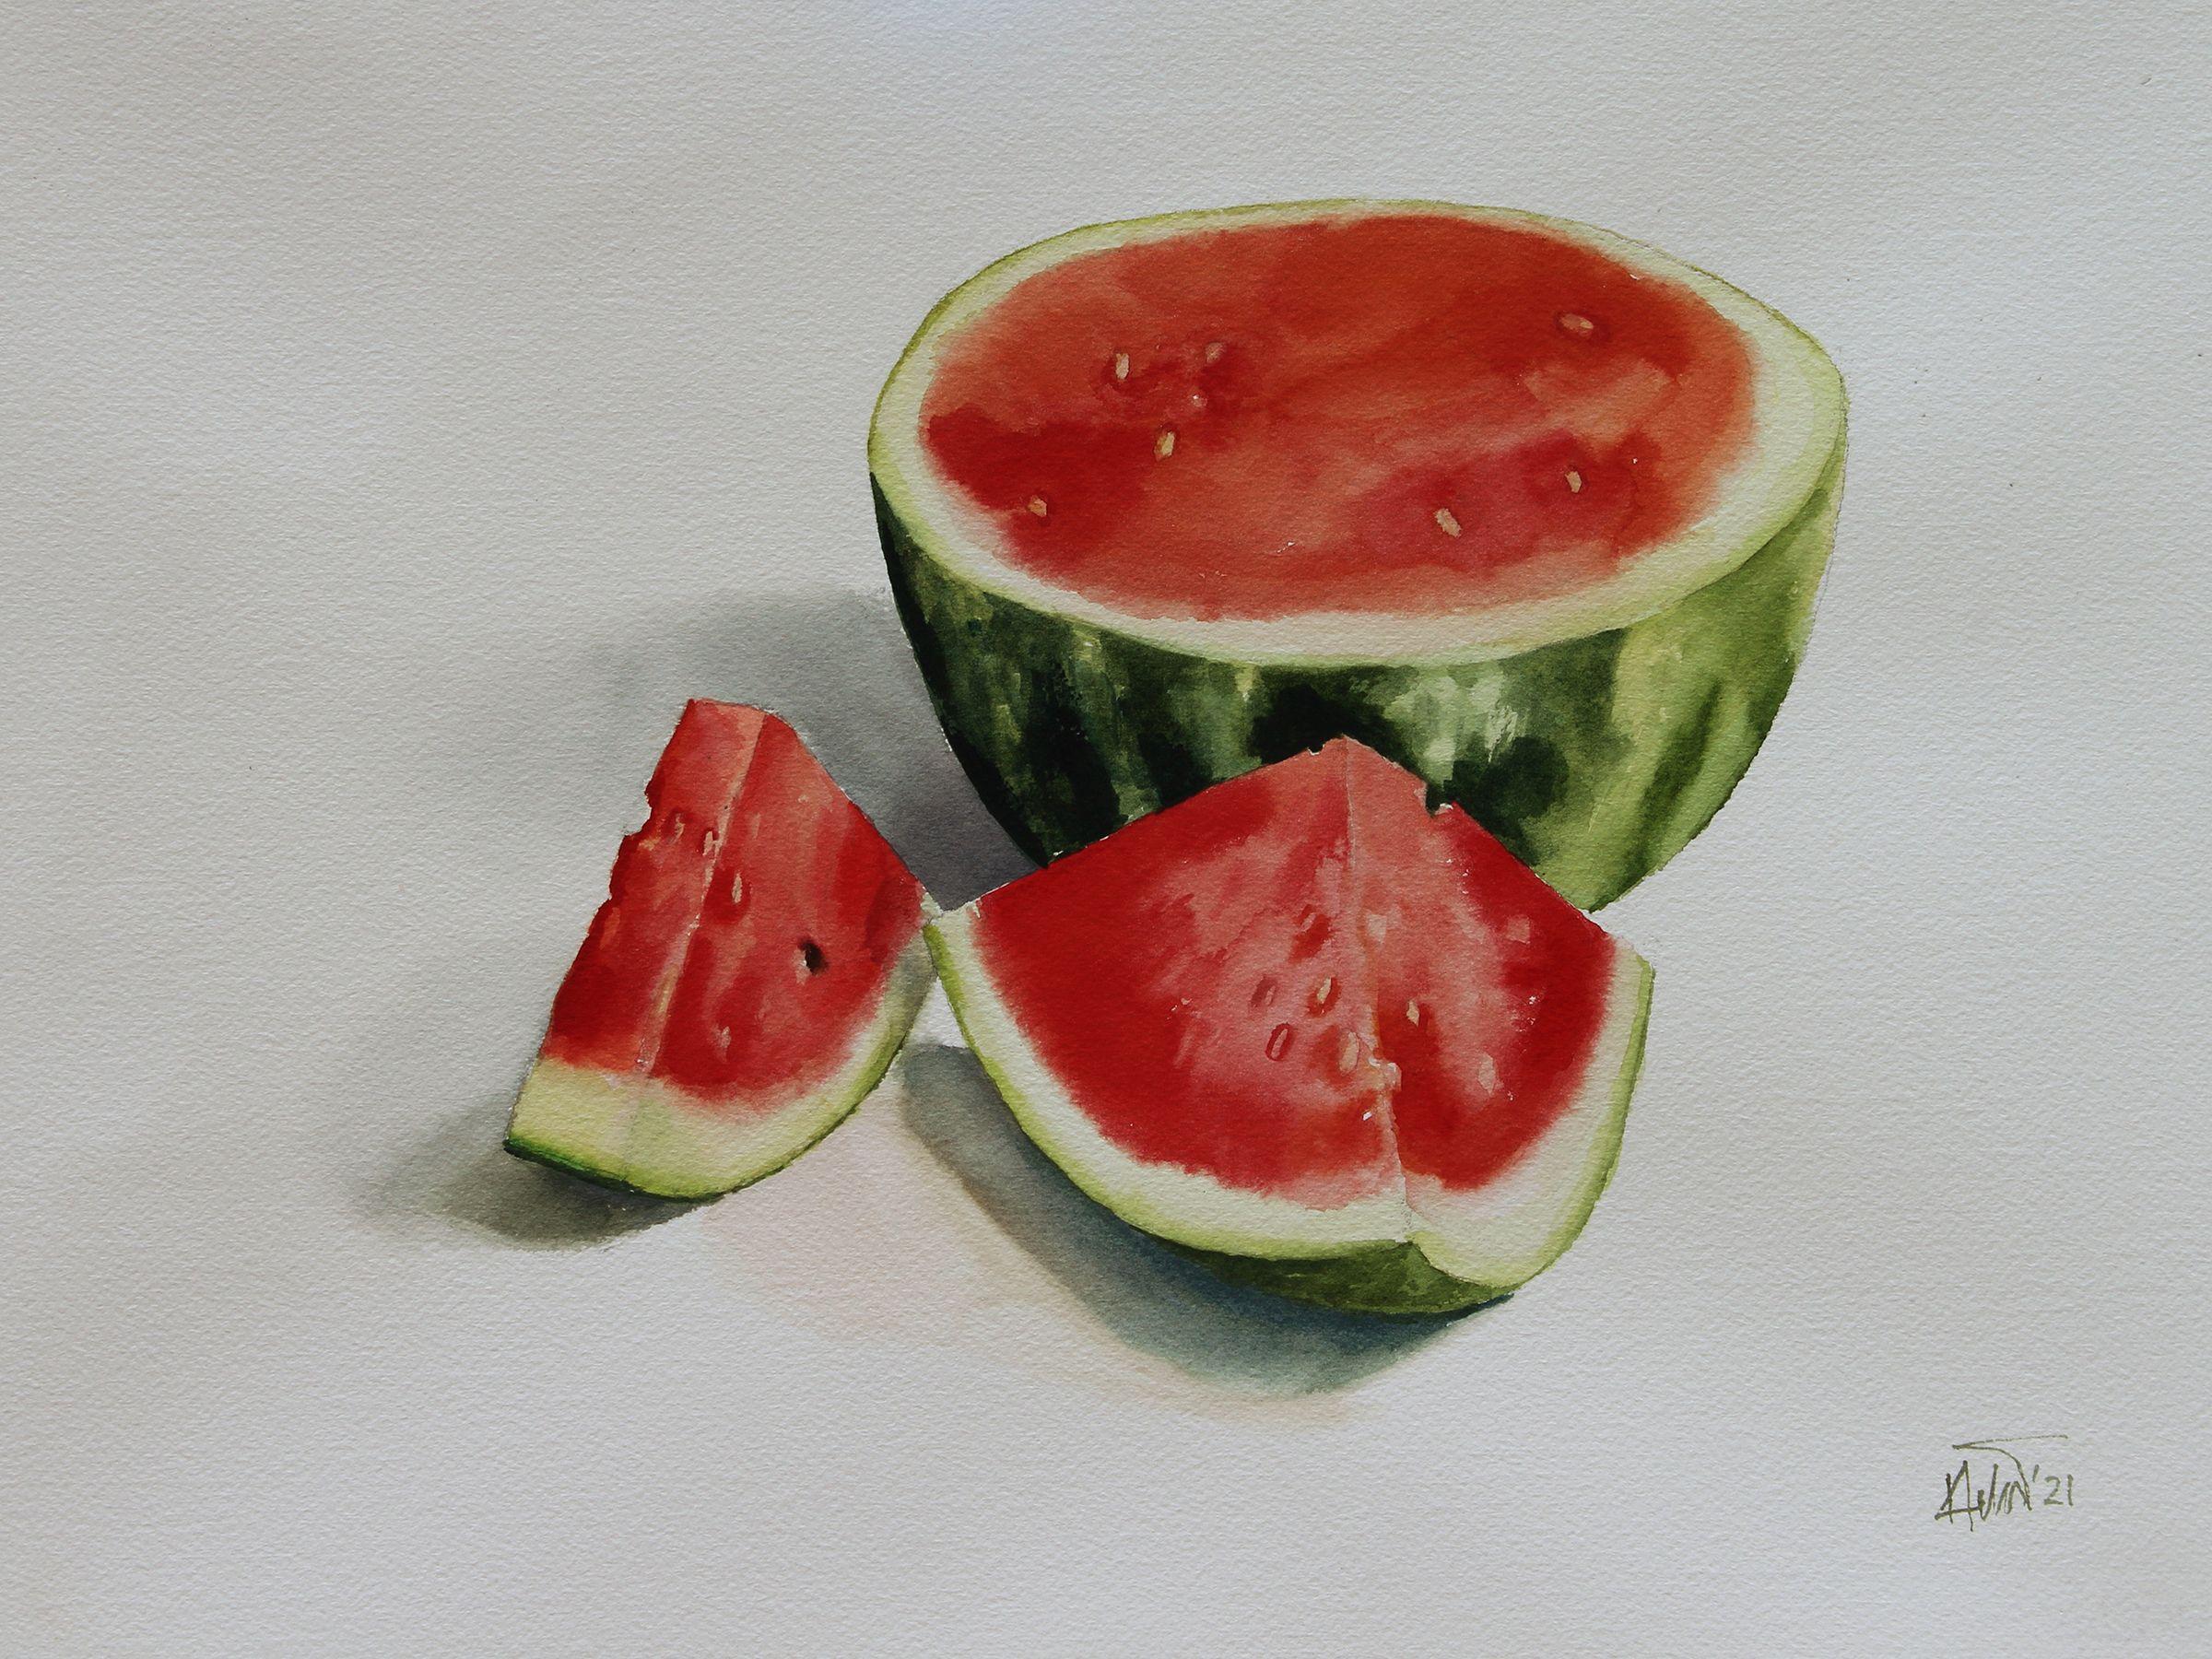 Watermelon_01, Painting, Watercolor on Watercolor Paper - Art by Helal Uddin